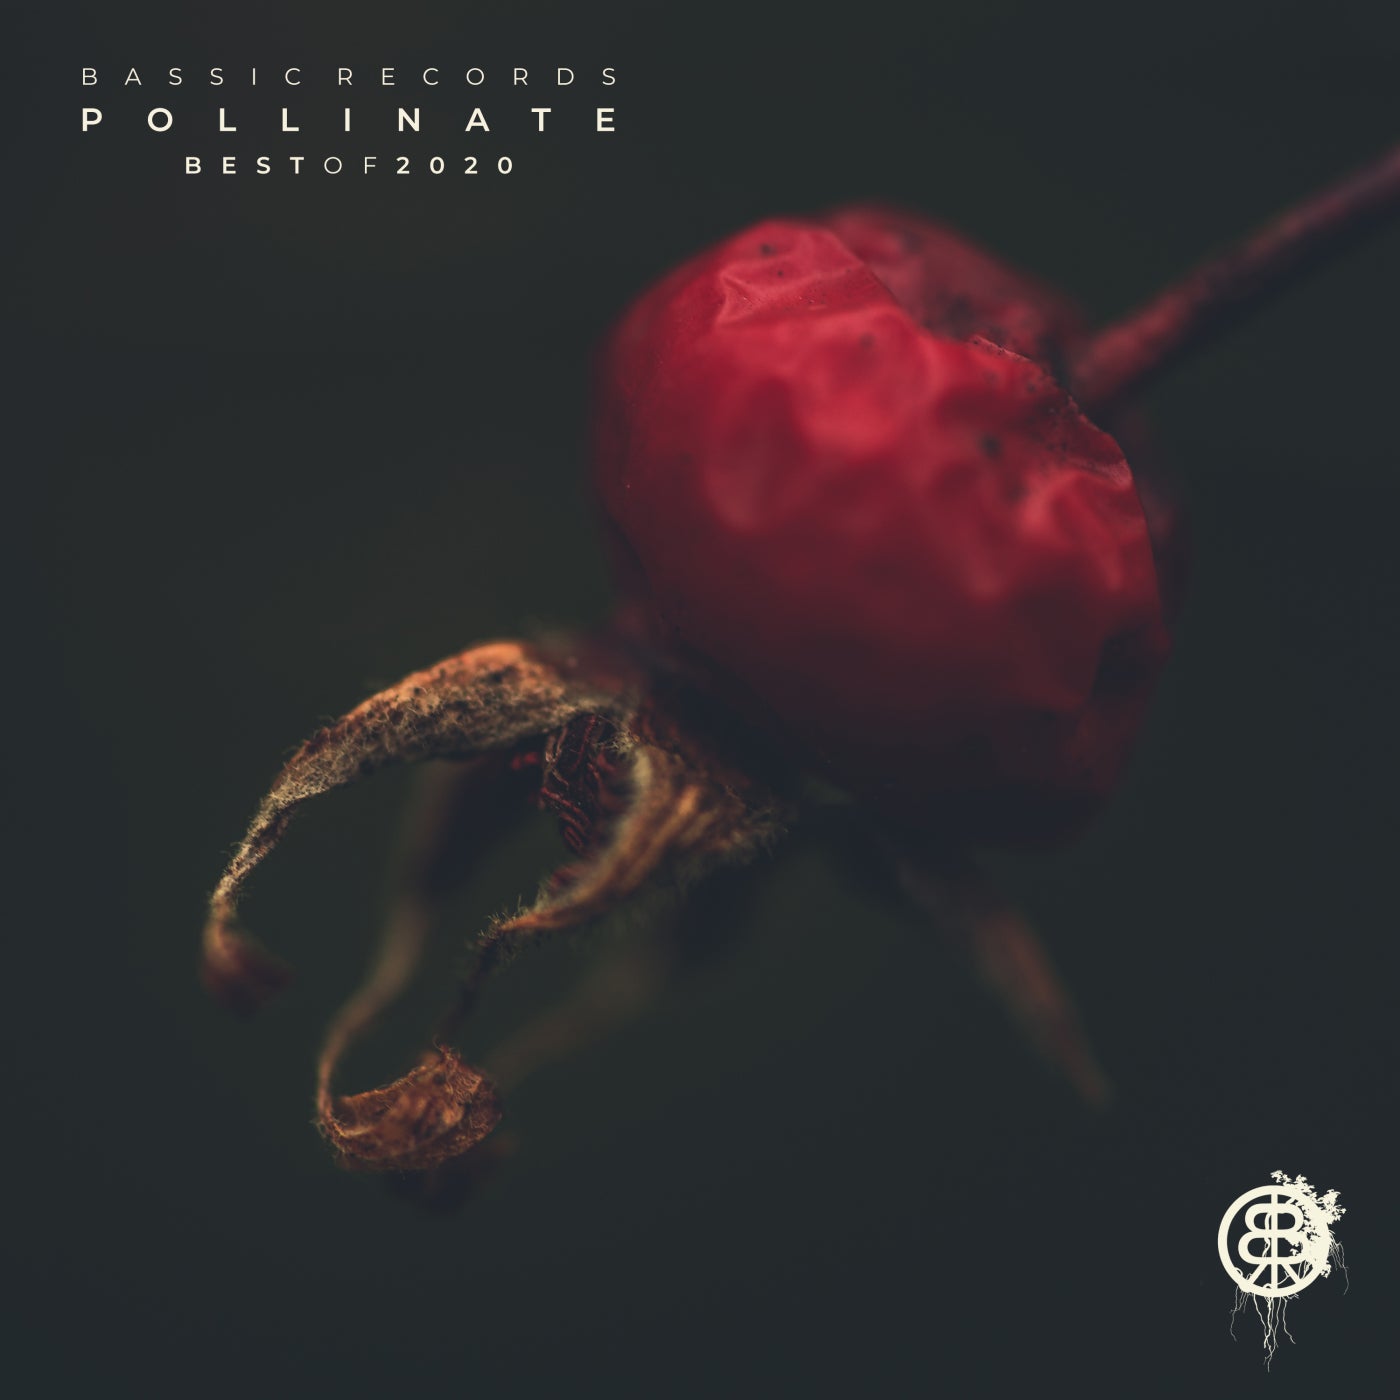 Pollinate - Best of 2020